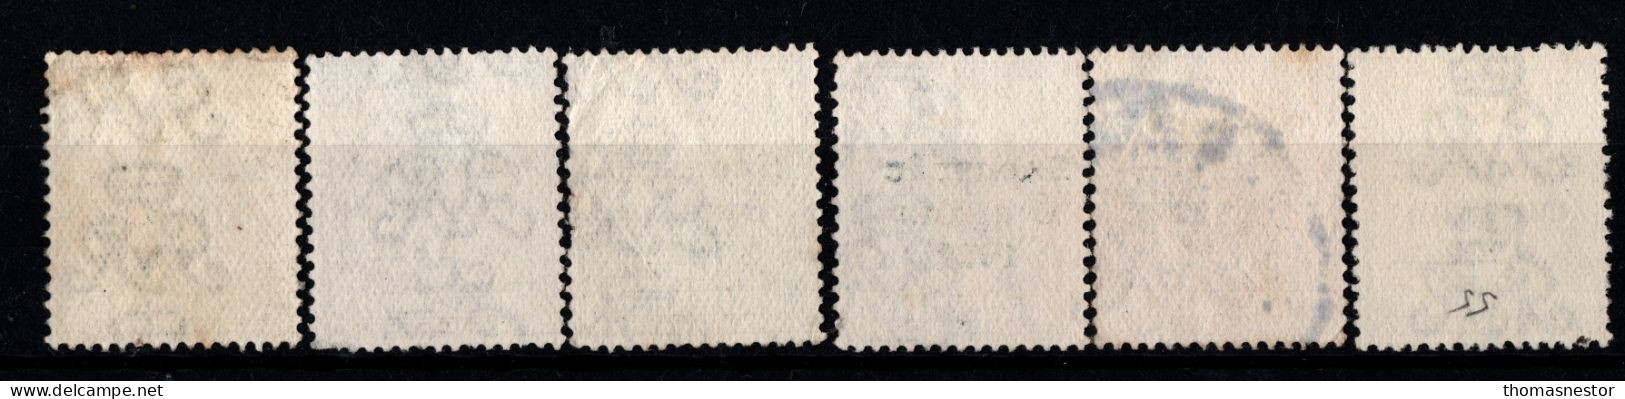 1922-1923 Dec - Jan Thom Saorstát Black or Red Ink, with Fiscal cancellation, parcel and commercial cancel 47 in total